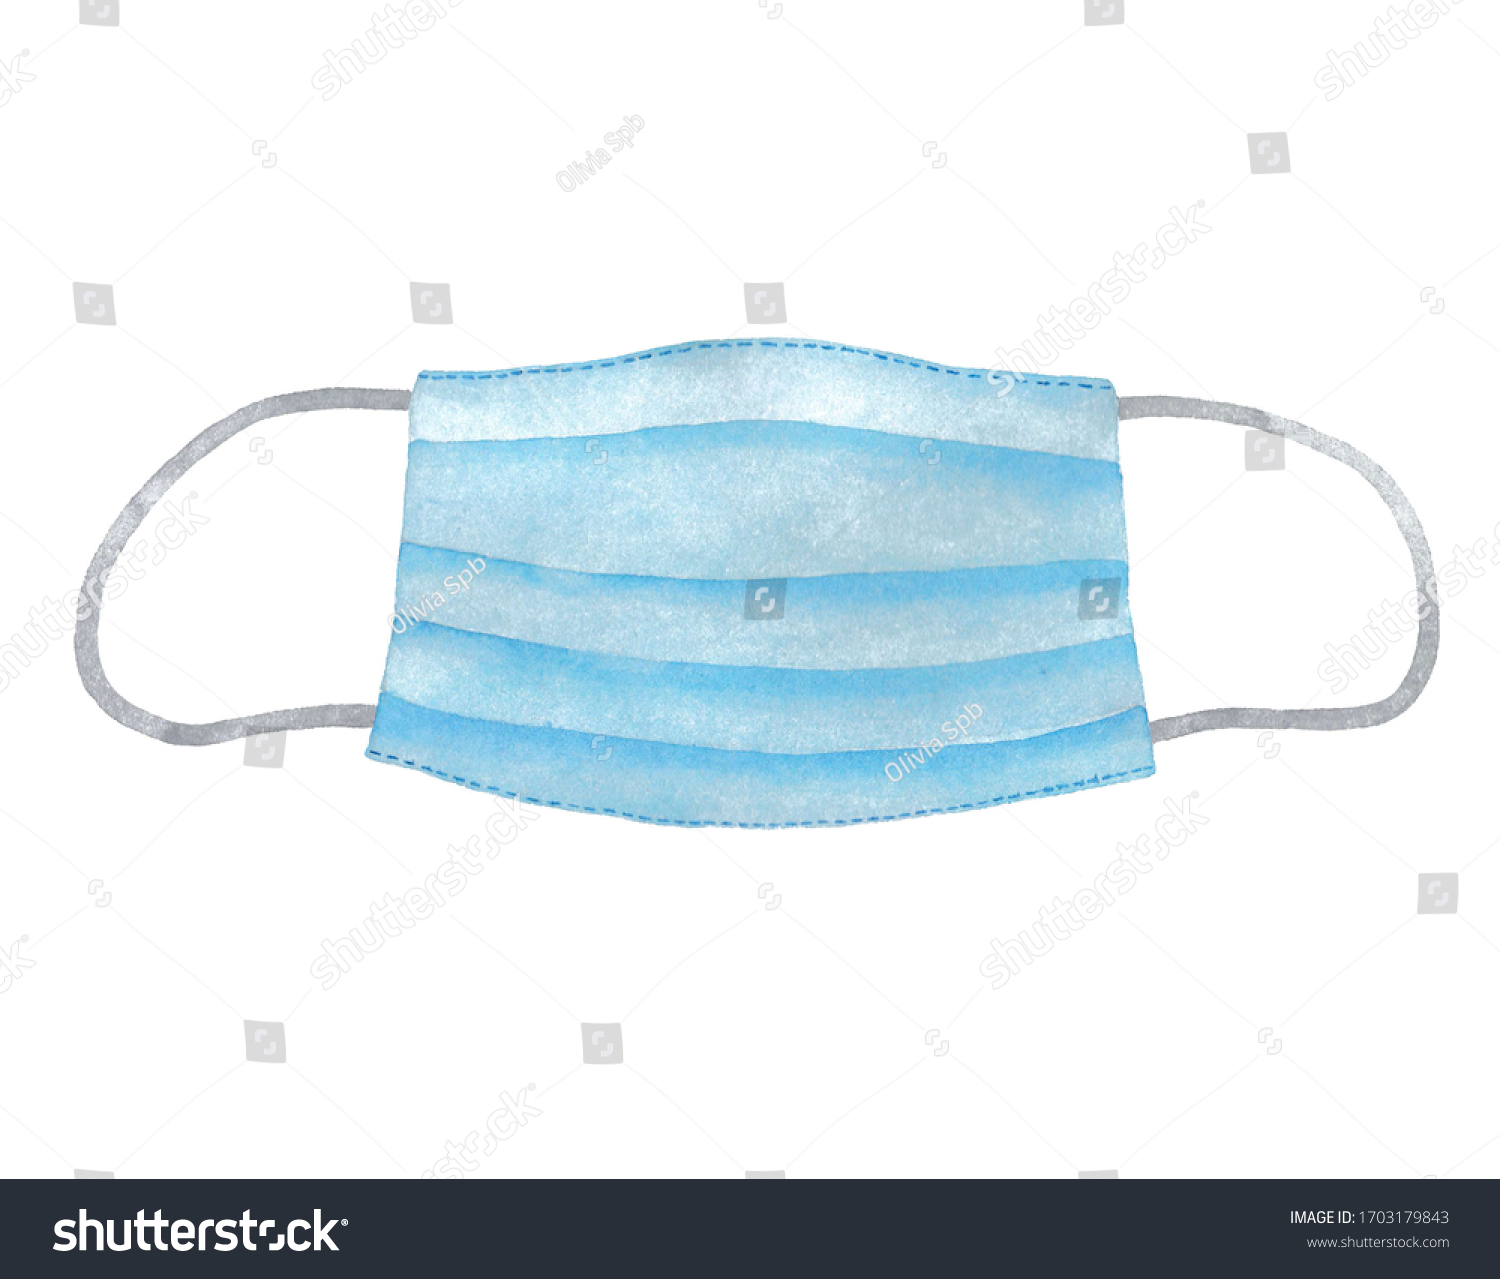 Protection mask isolated on white background, watercolor illustration  #1703179843